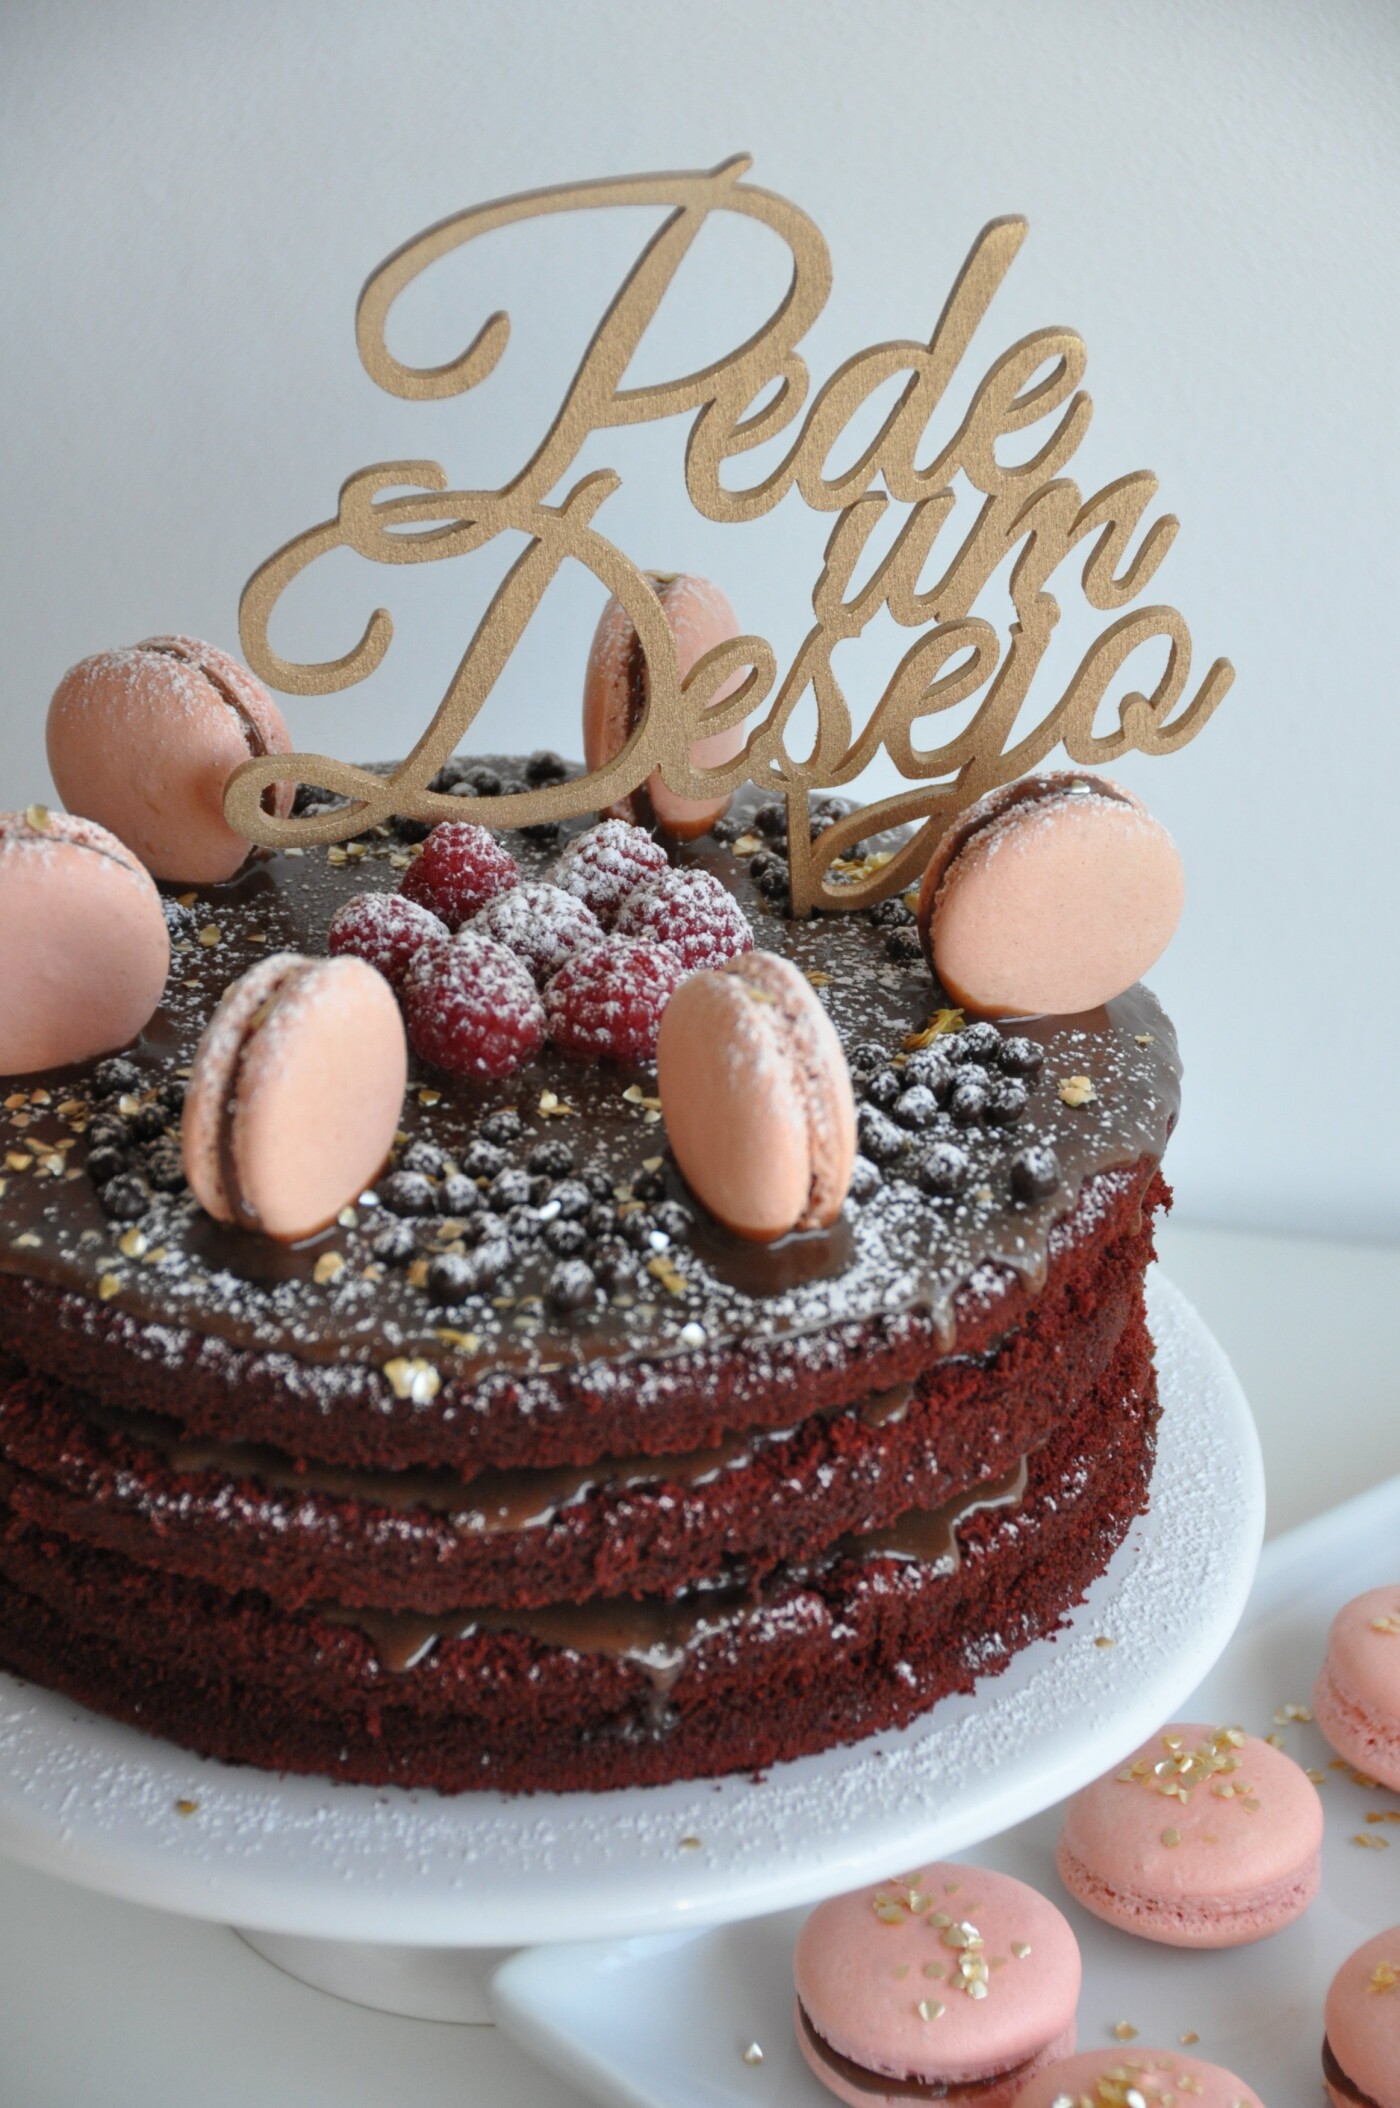 This is a birthday cake I have made for my mother-in-law. It was a red velvet cake, with raspberries, chocolate ganache and macarrons. I had the topper designed specially in Portuguese and it says "make a wish".